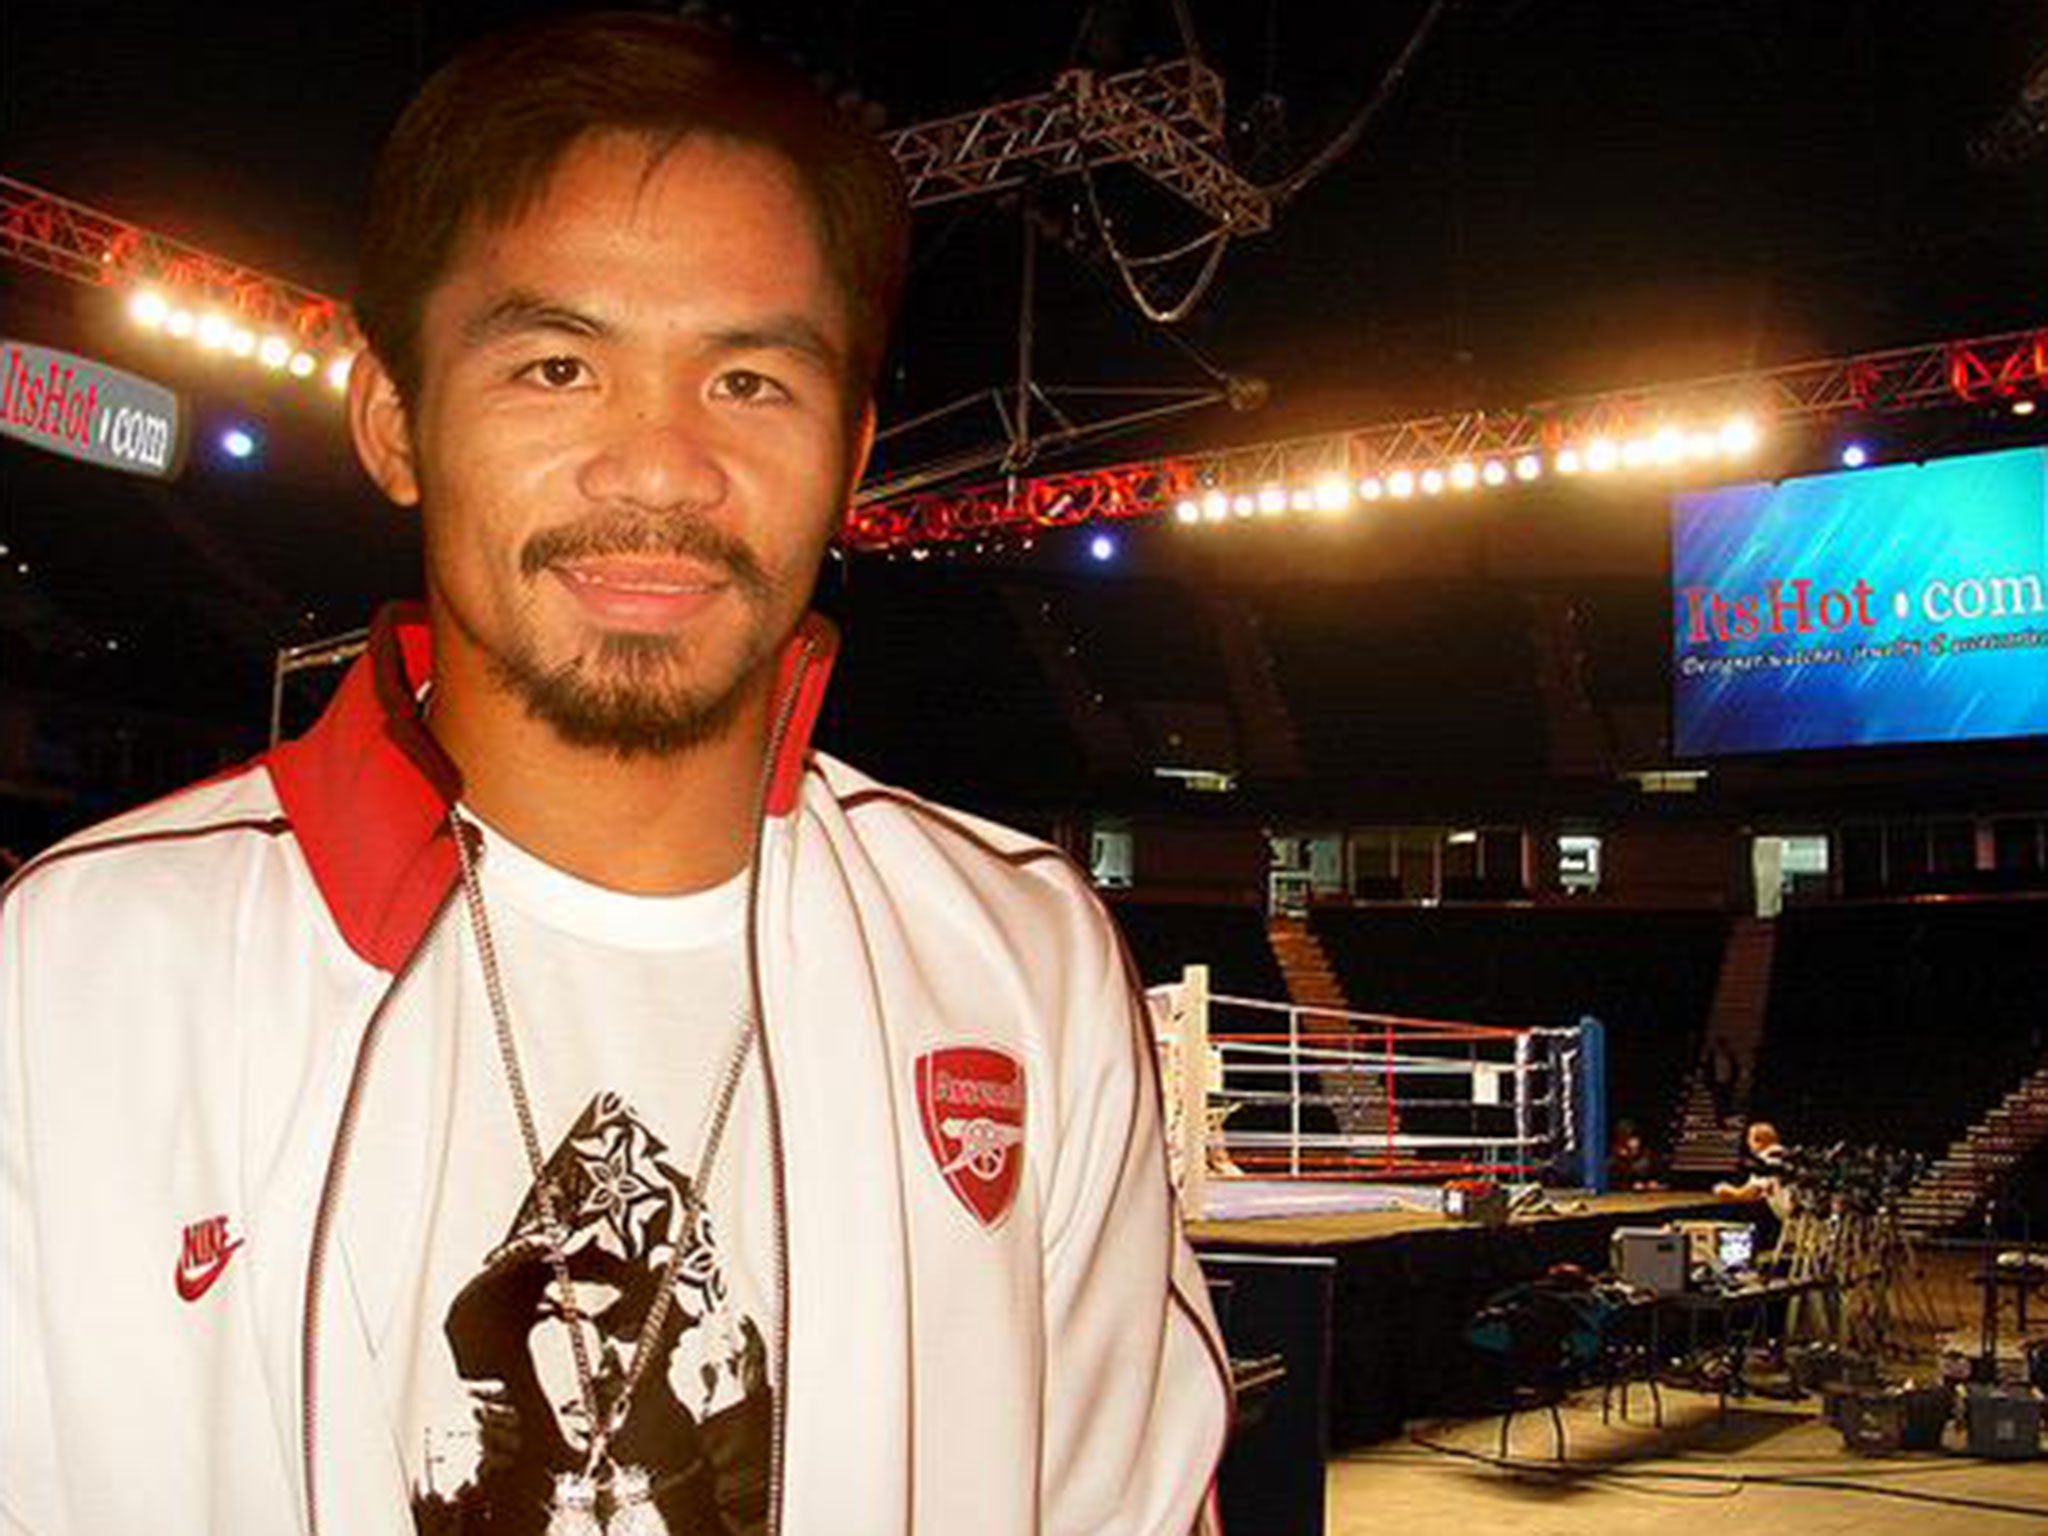 Manny Pacquiao pictured in an Arsenal shirt